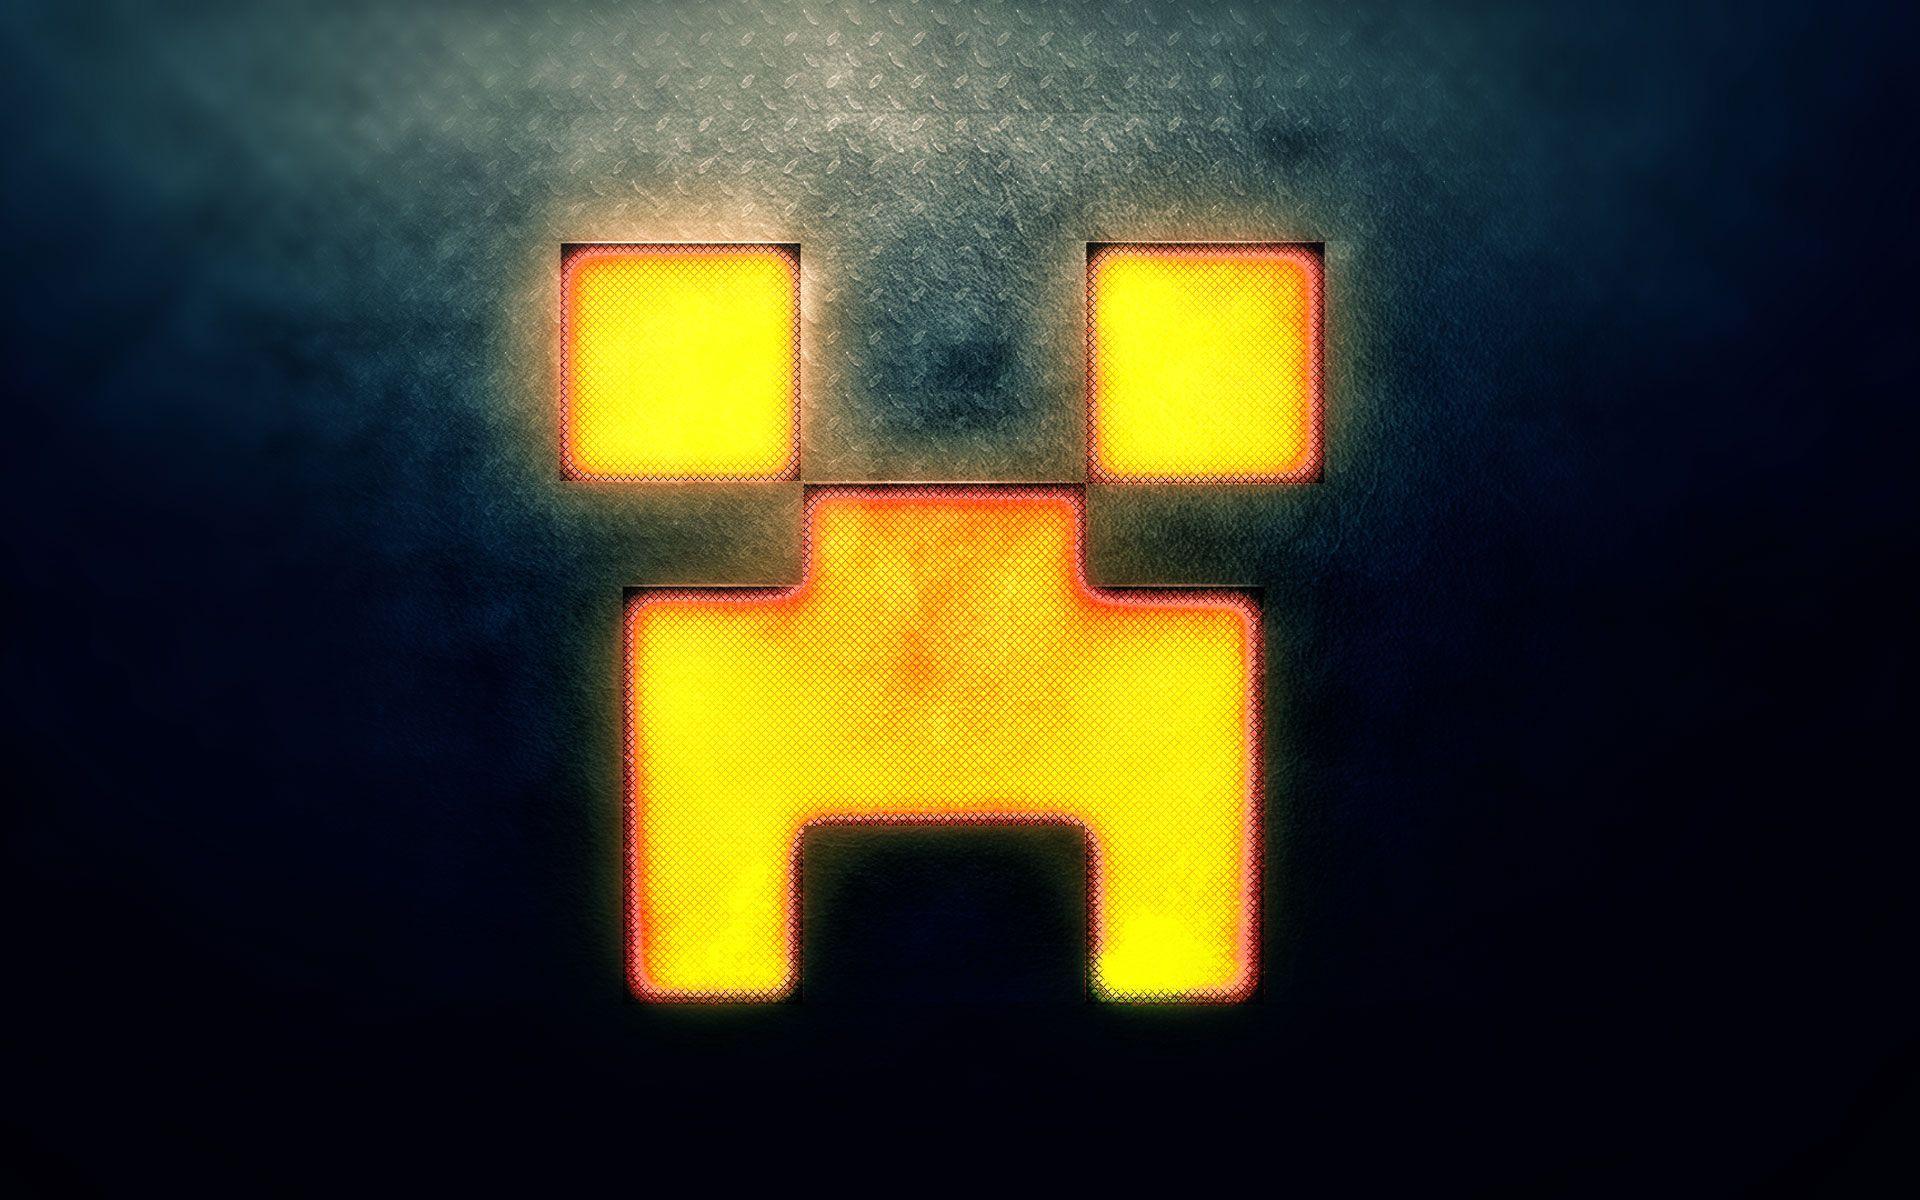 minecraft skins wallpapers Wallpapers